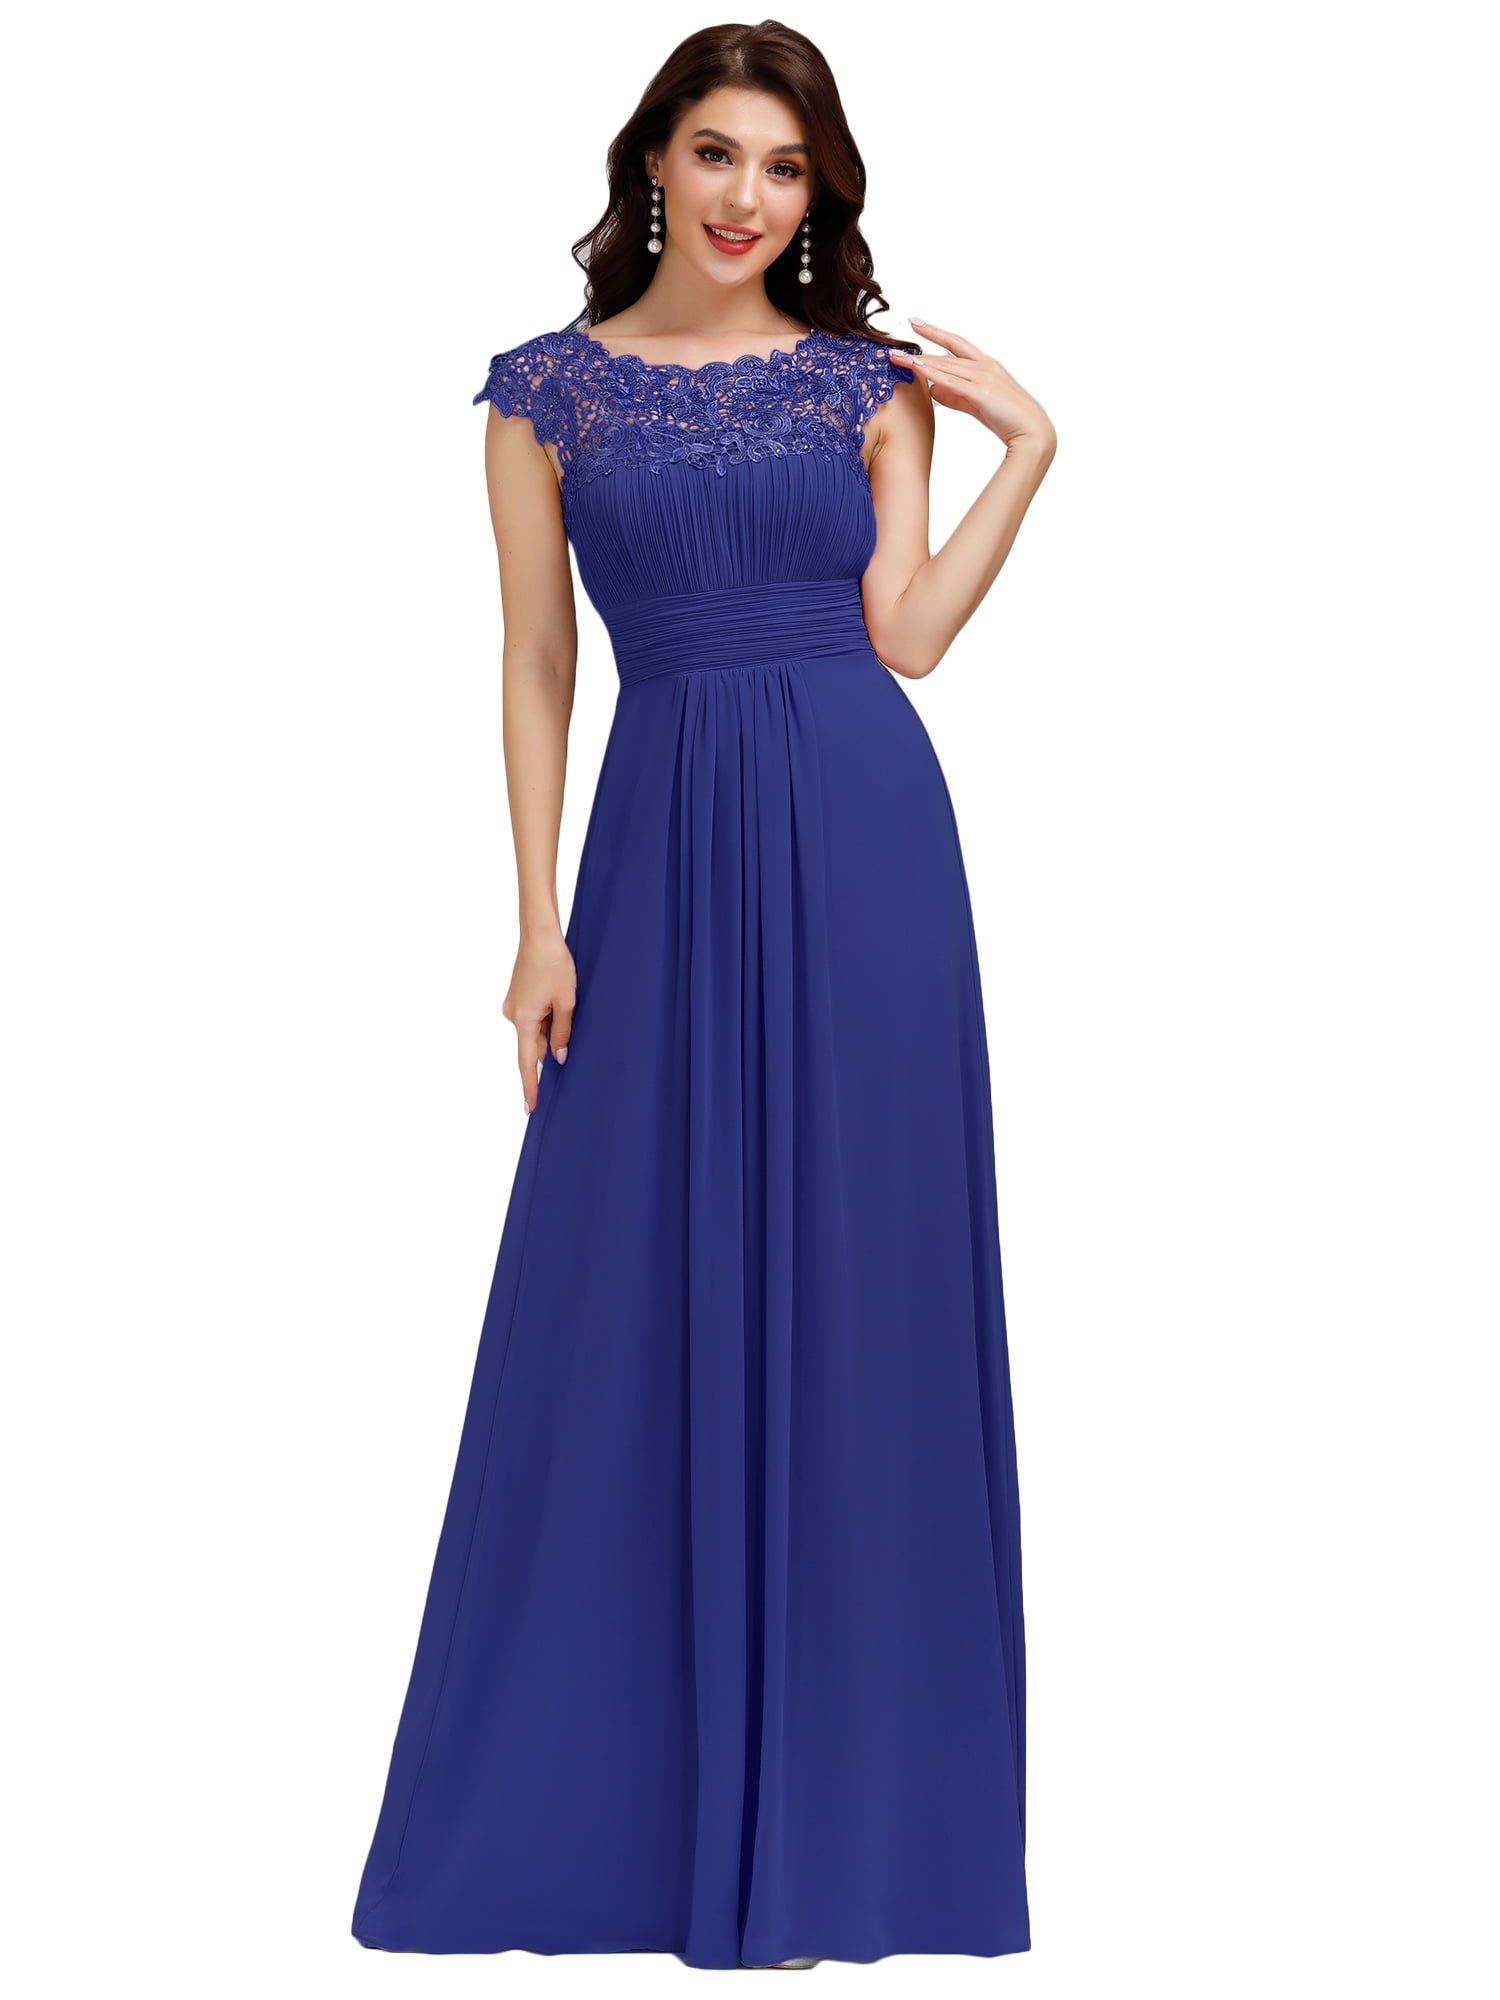 Sapphire Mother of the Bride Dress